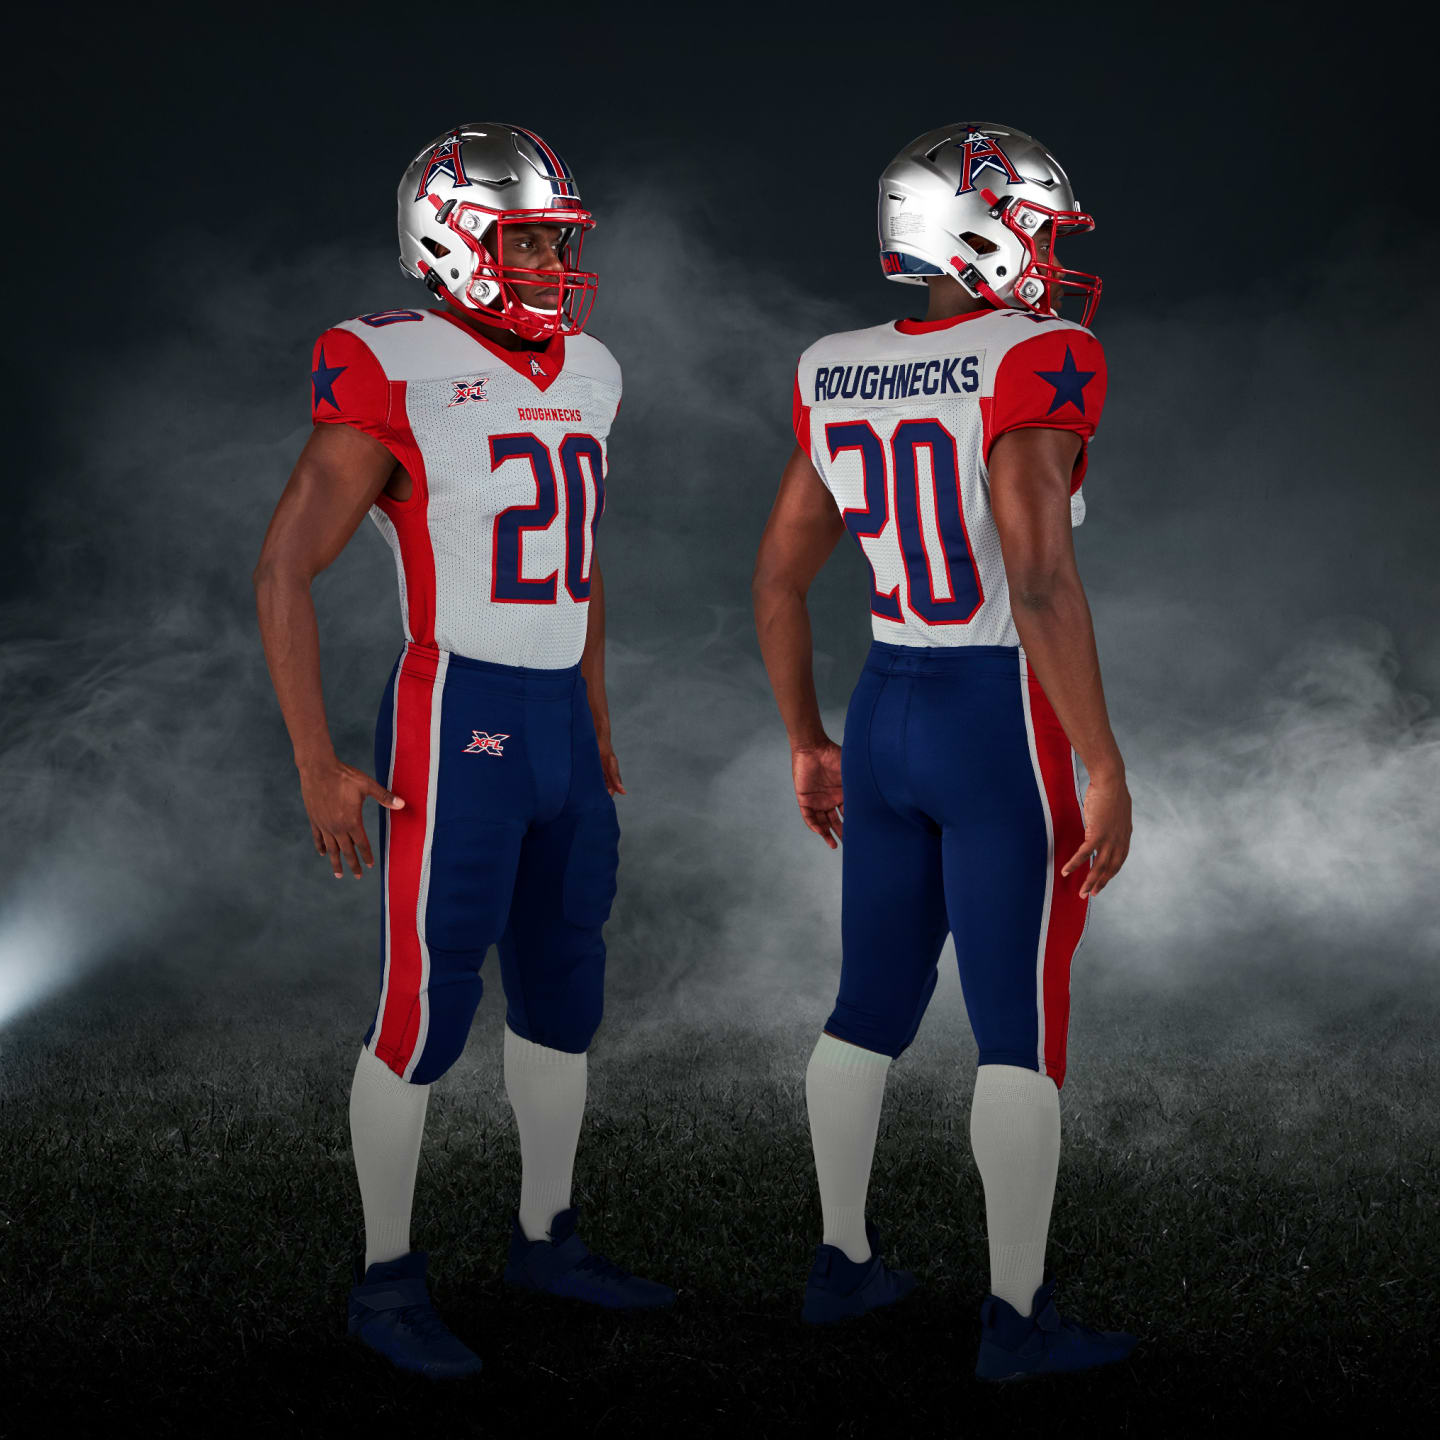 XFL uniforms 2023: Houston Roughnecks to suit up in Under Armour gear that  tips hat to Texas and oil industry - ABC13 Houston